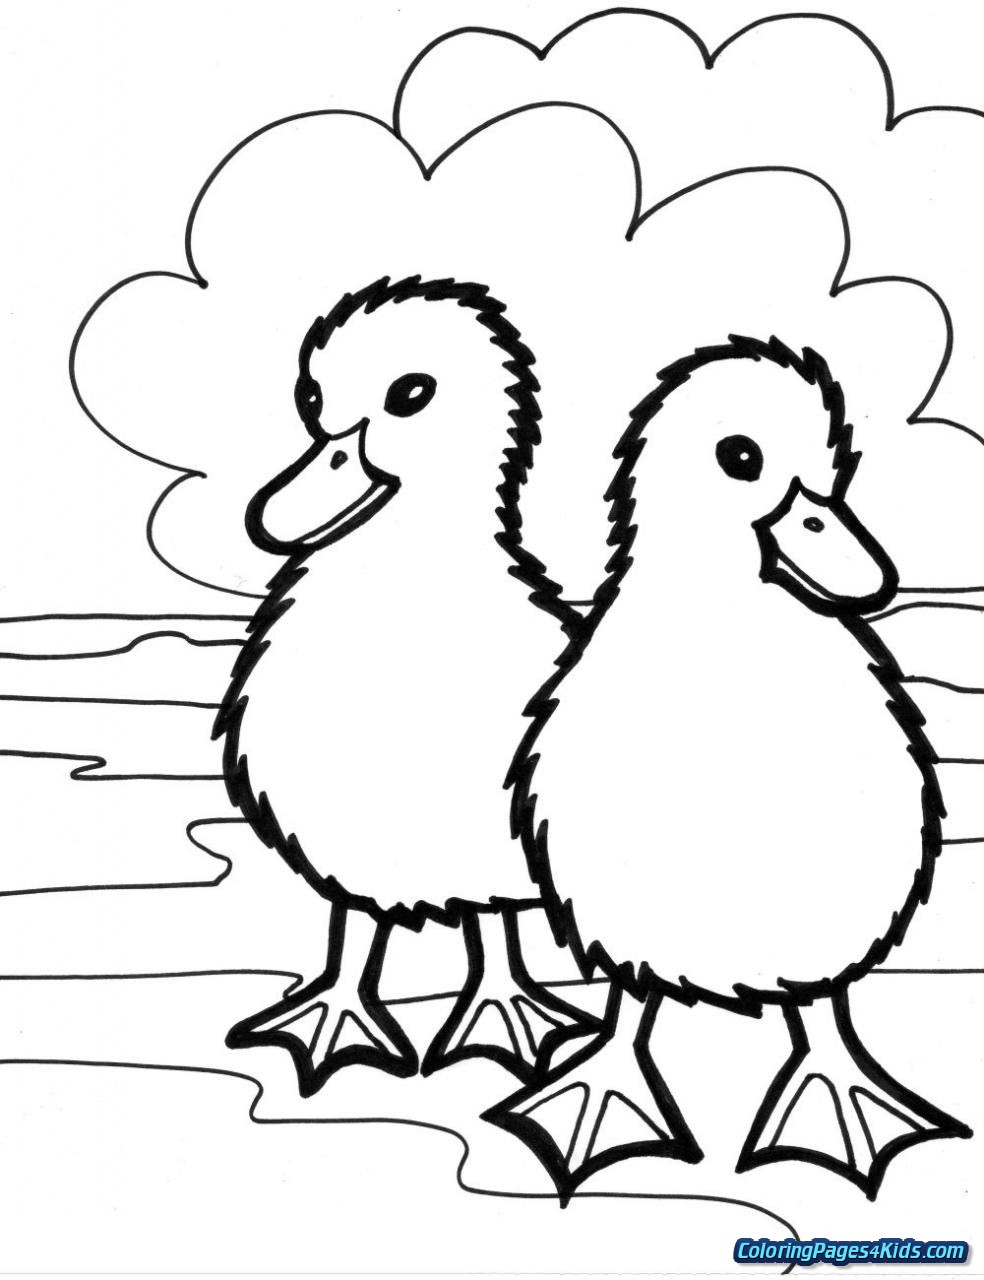 Pdf Coloring Pages For Kids Coloring Pages Coloring Book For Kids Pdf Free World Pages Farm